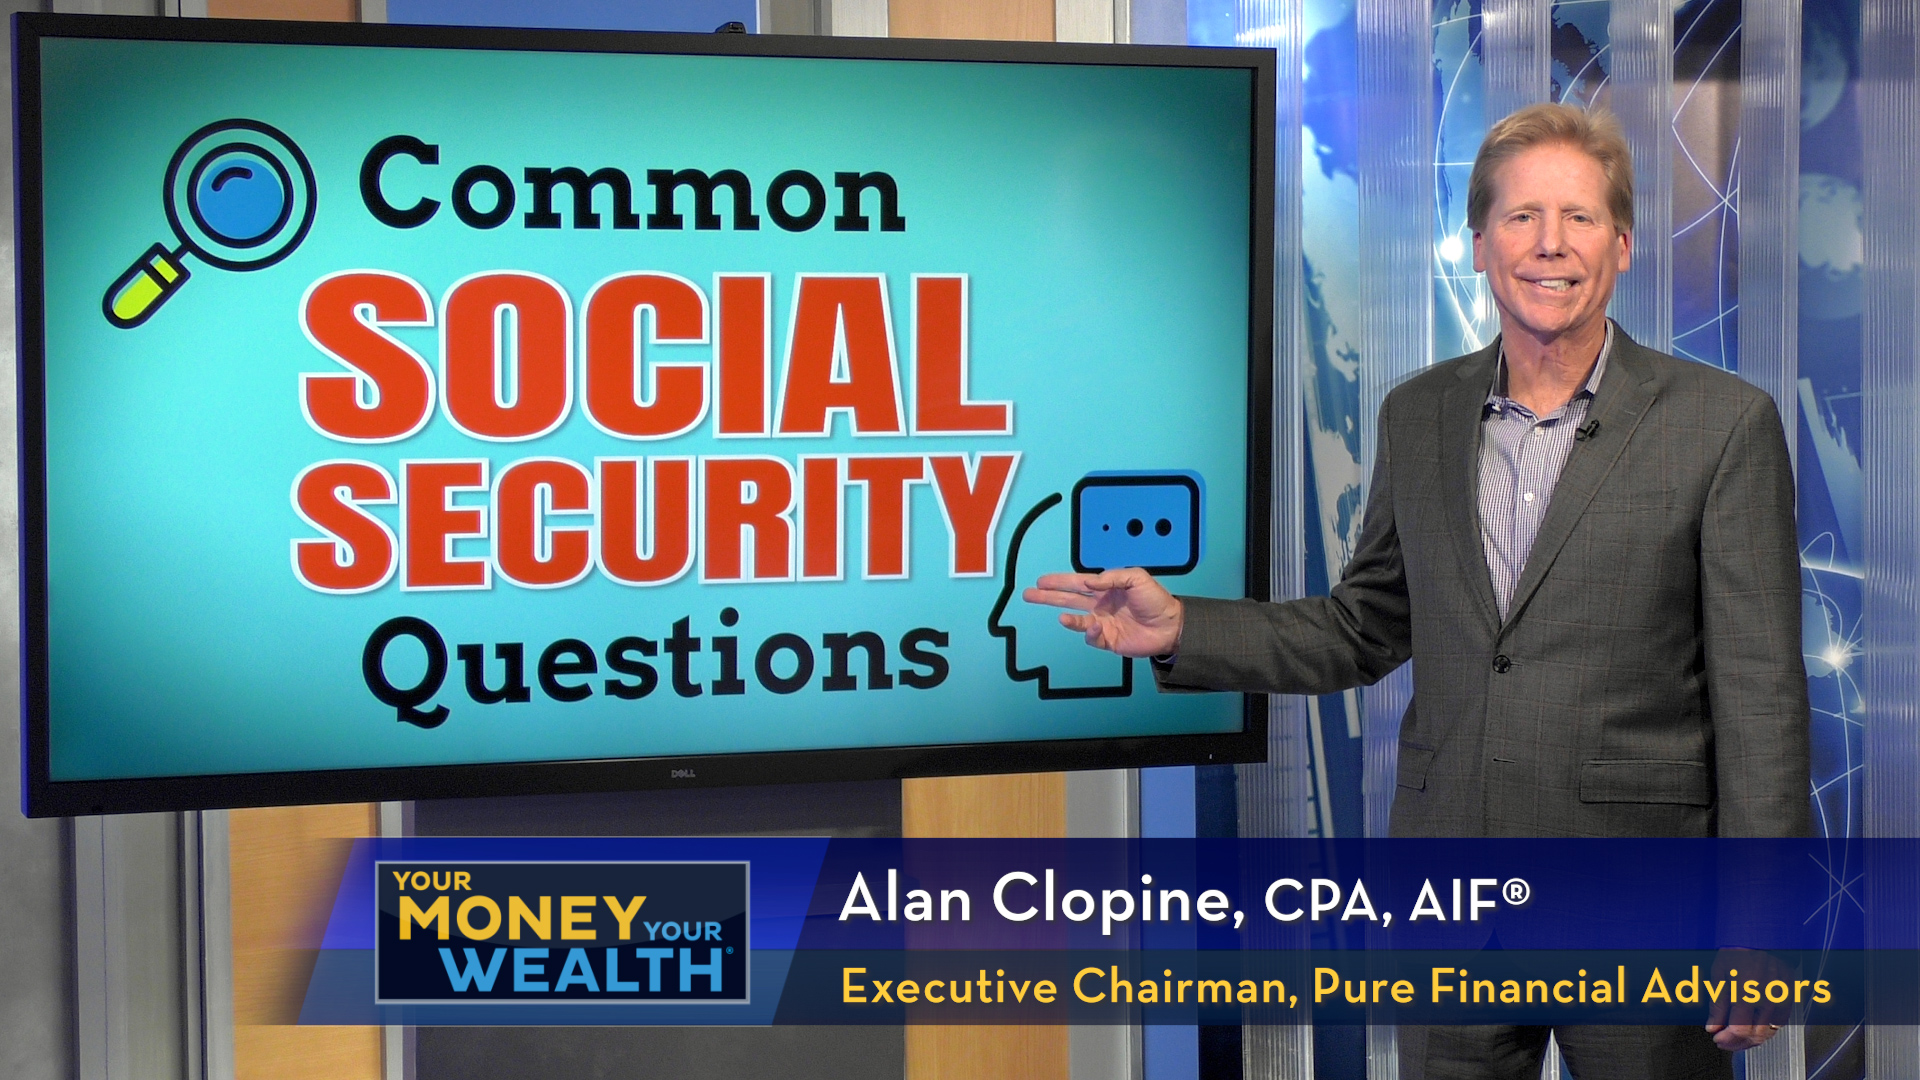 Social Security Basics You Need to Know: Common Questions Answered | Your Money, Your Wealth TV S10 | E04